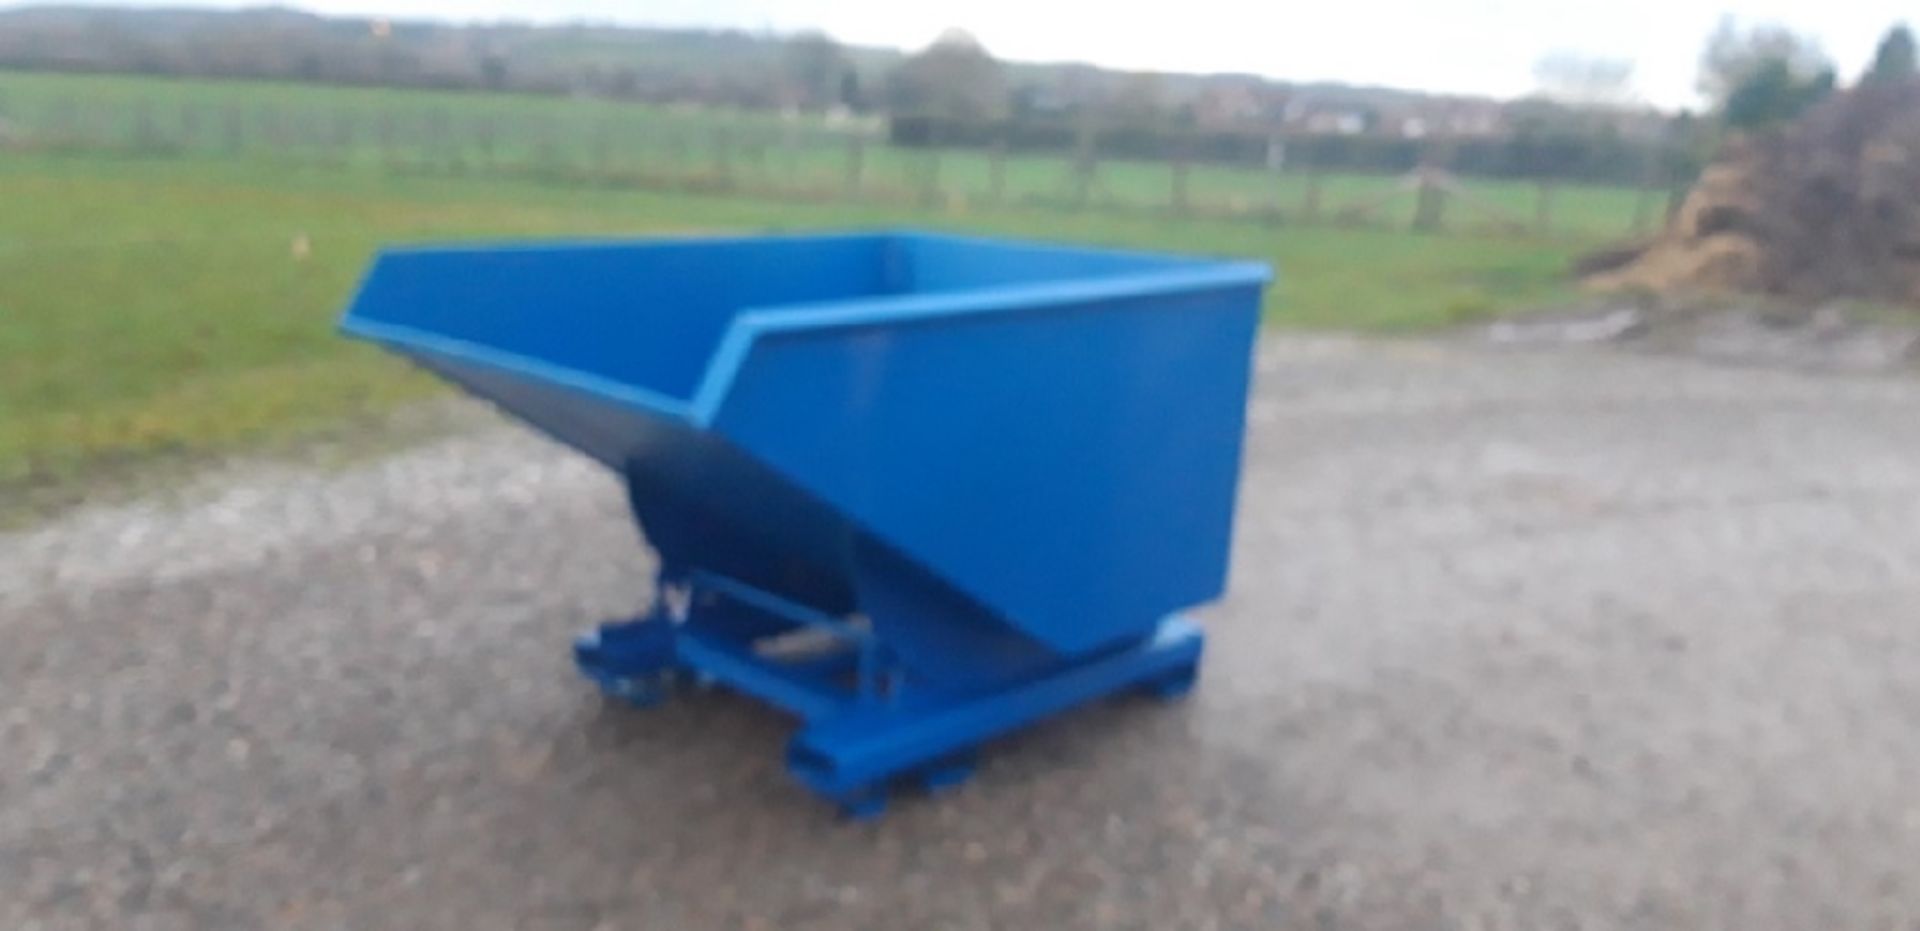 NEW GREEN 1250 LITRE TIP SKIP 4WAY ENTRY - Image 7 of 8